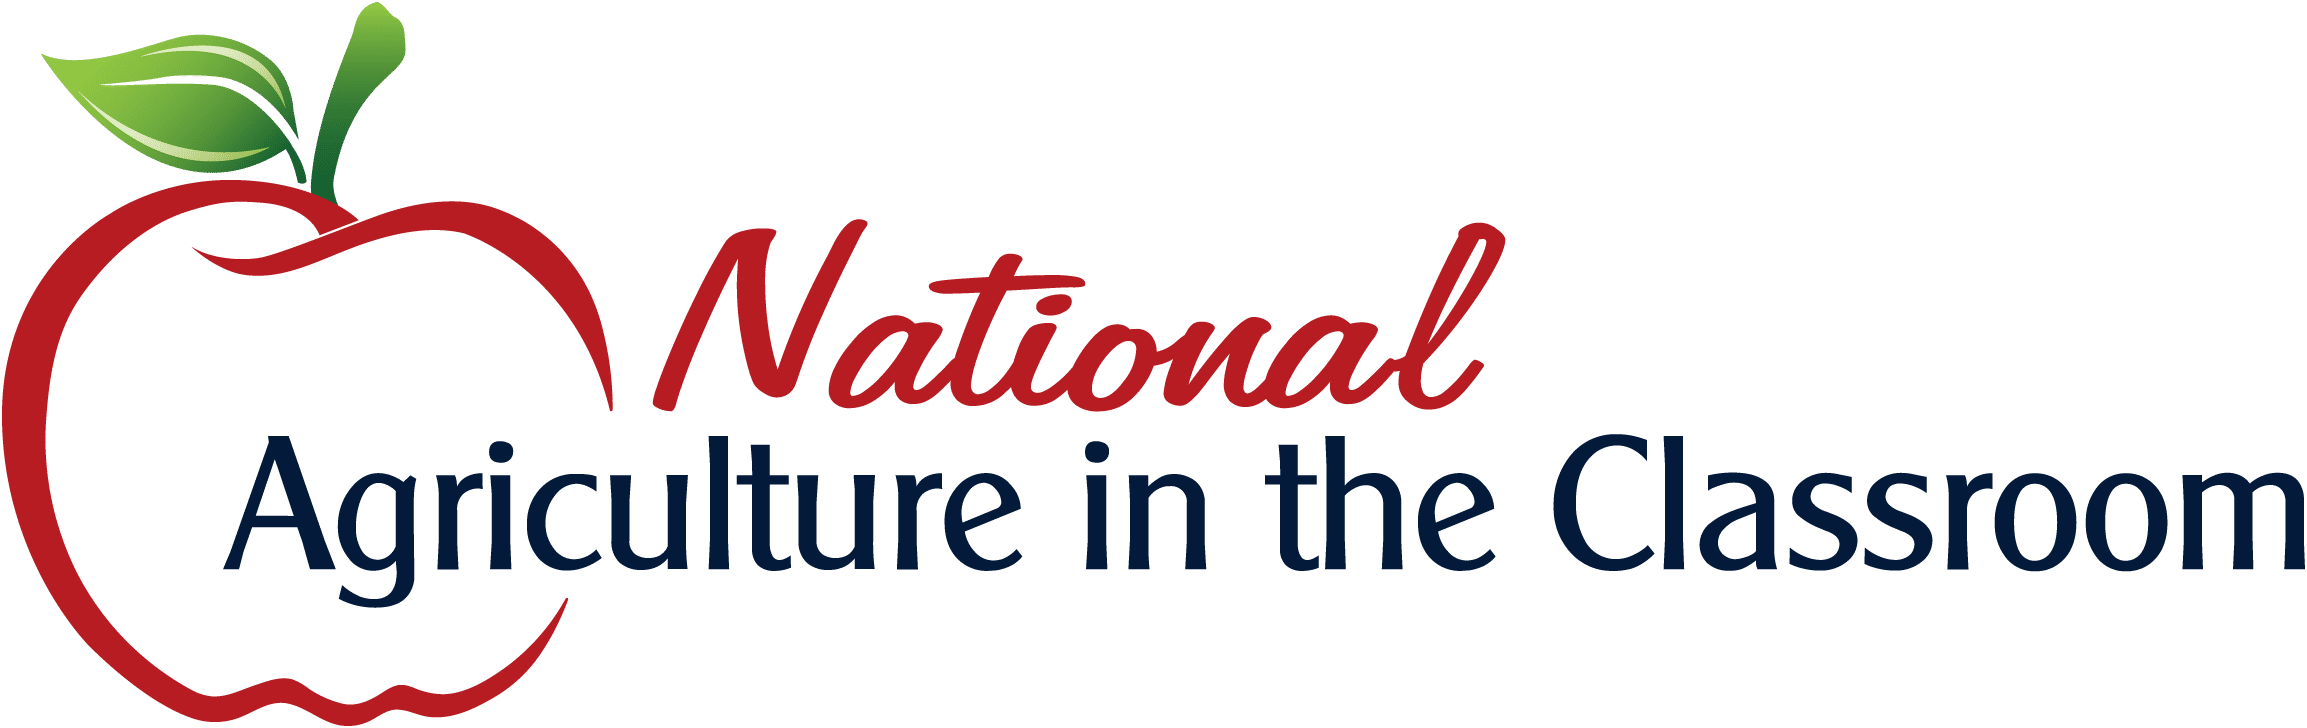 The national agriculture foundation logo sponsored by classroom.